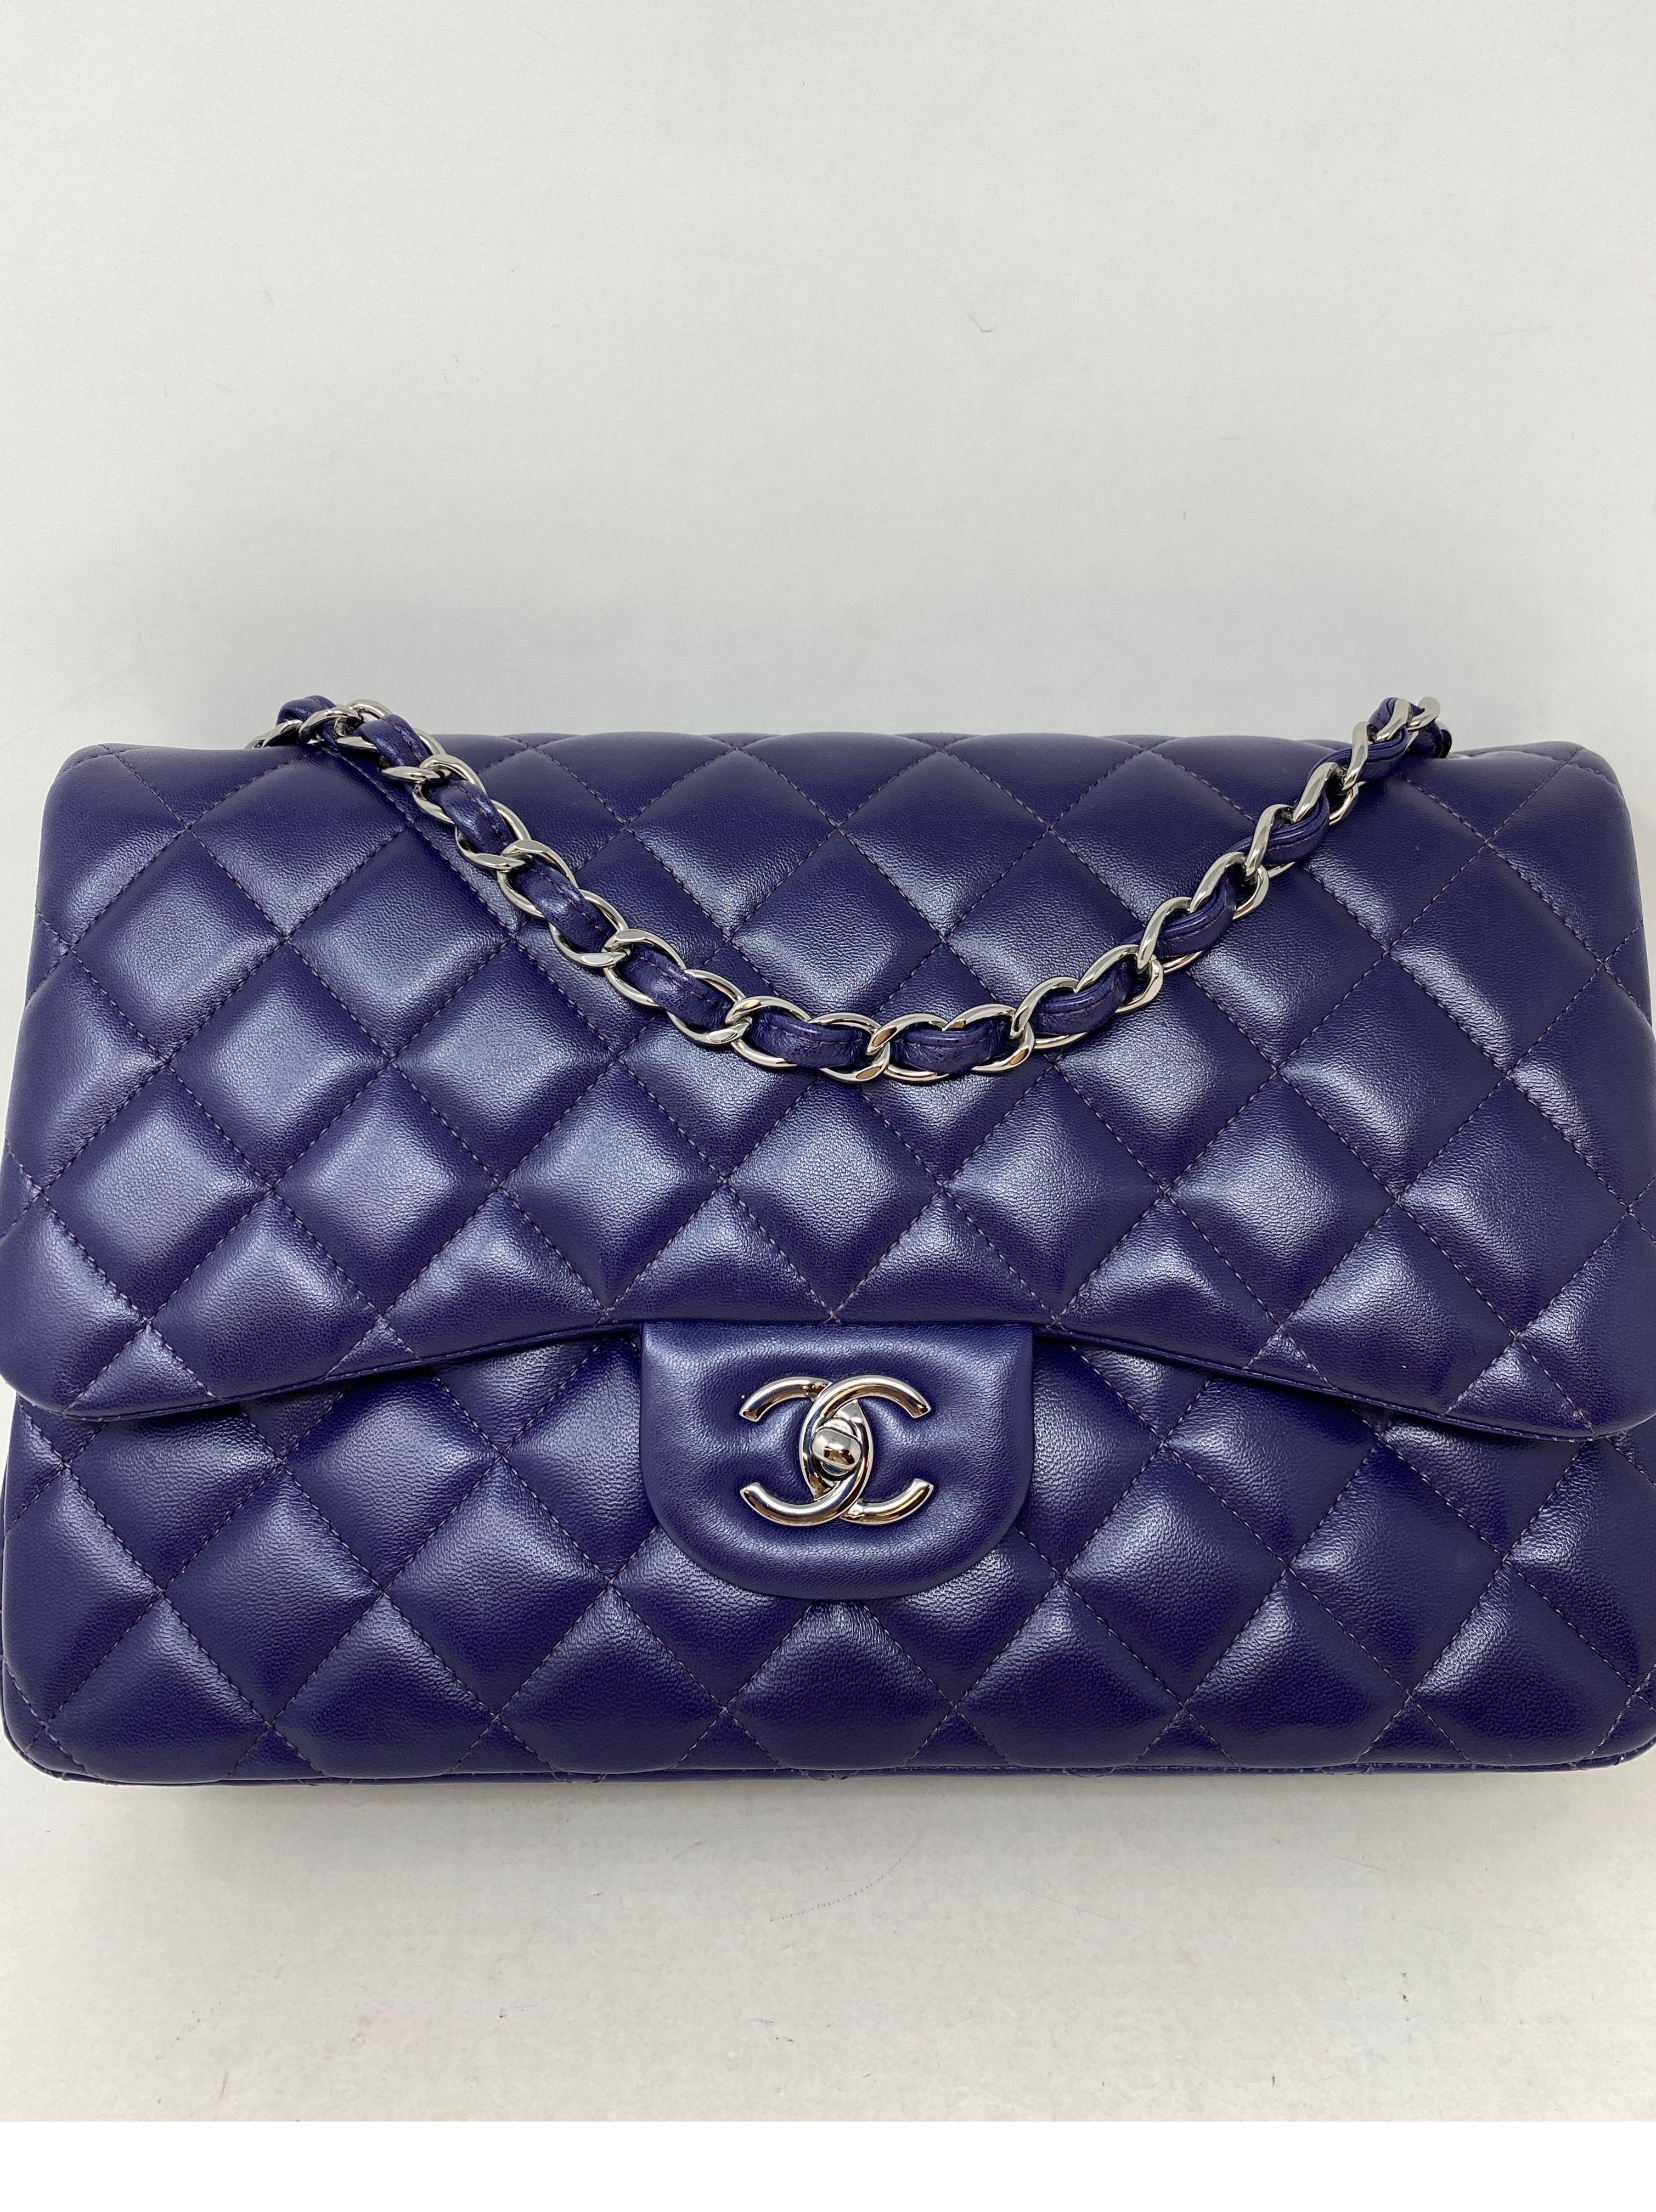 Chanel Purple Jumbo Double Flap Bag. Beautiful grape purple color. Lambskin leather Chanel. Excellent condition. Rare color and silver hardware. Can be worn as a crossbody or doubled strap as a shoulder bag. Includes full set. Authenticity card,